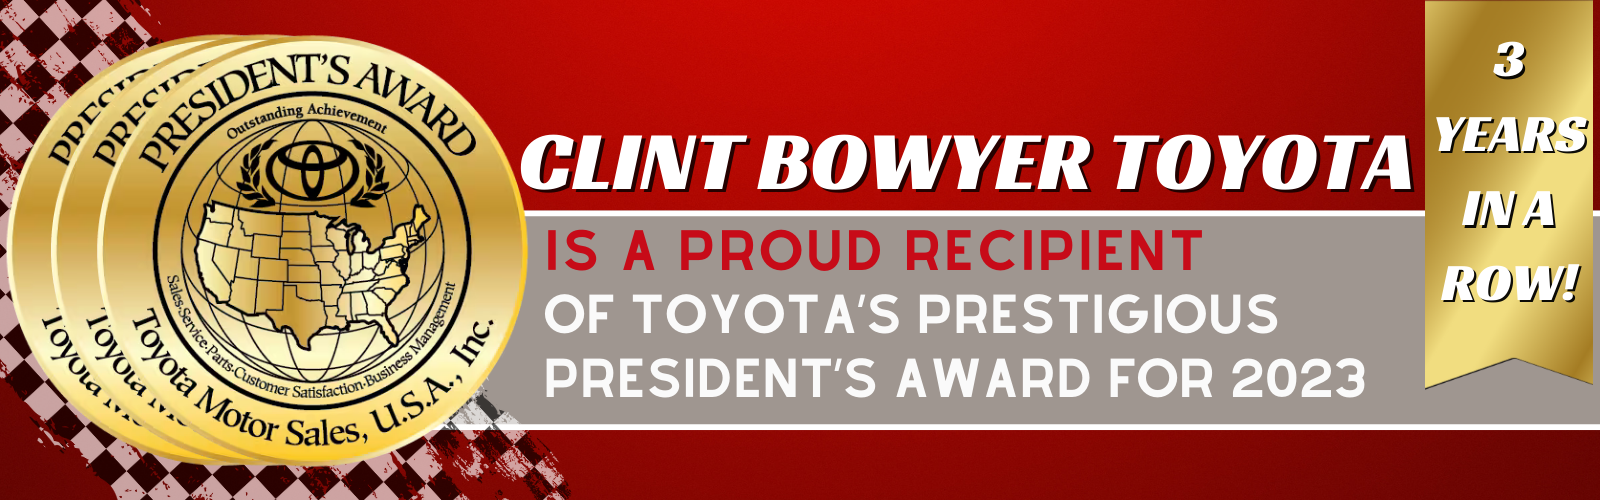 clint bowyer toyota is proud recipient of President's Award